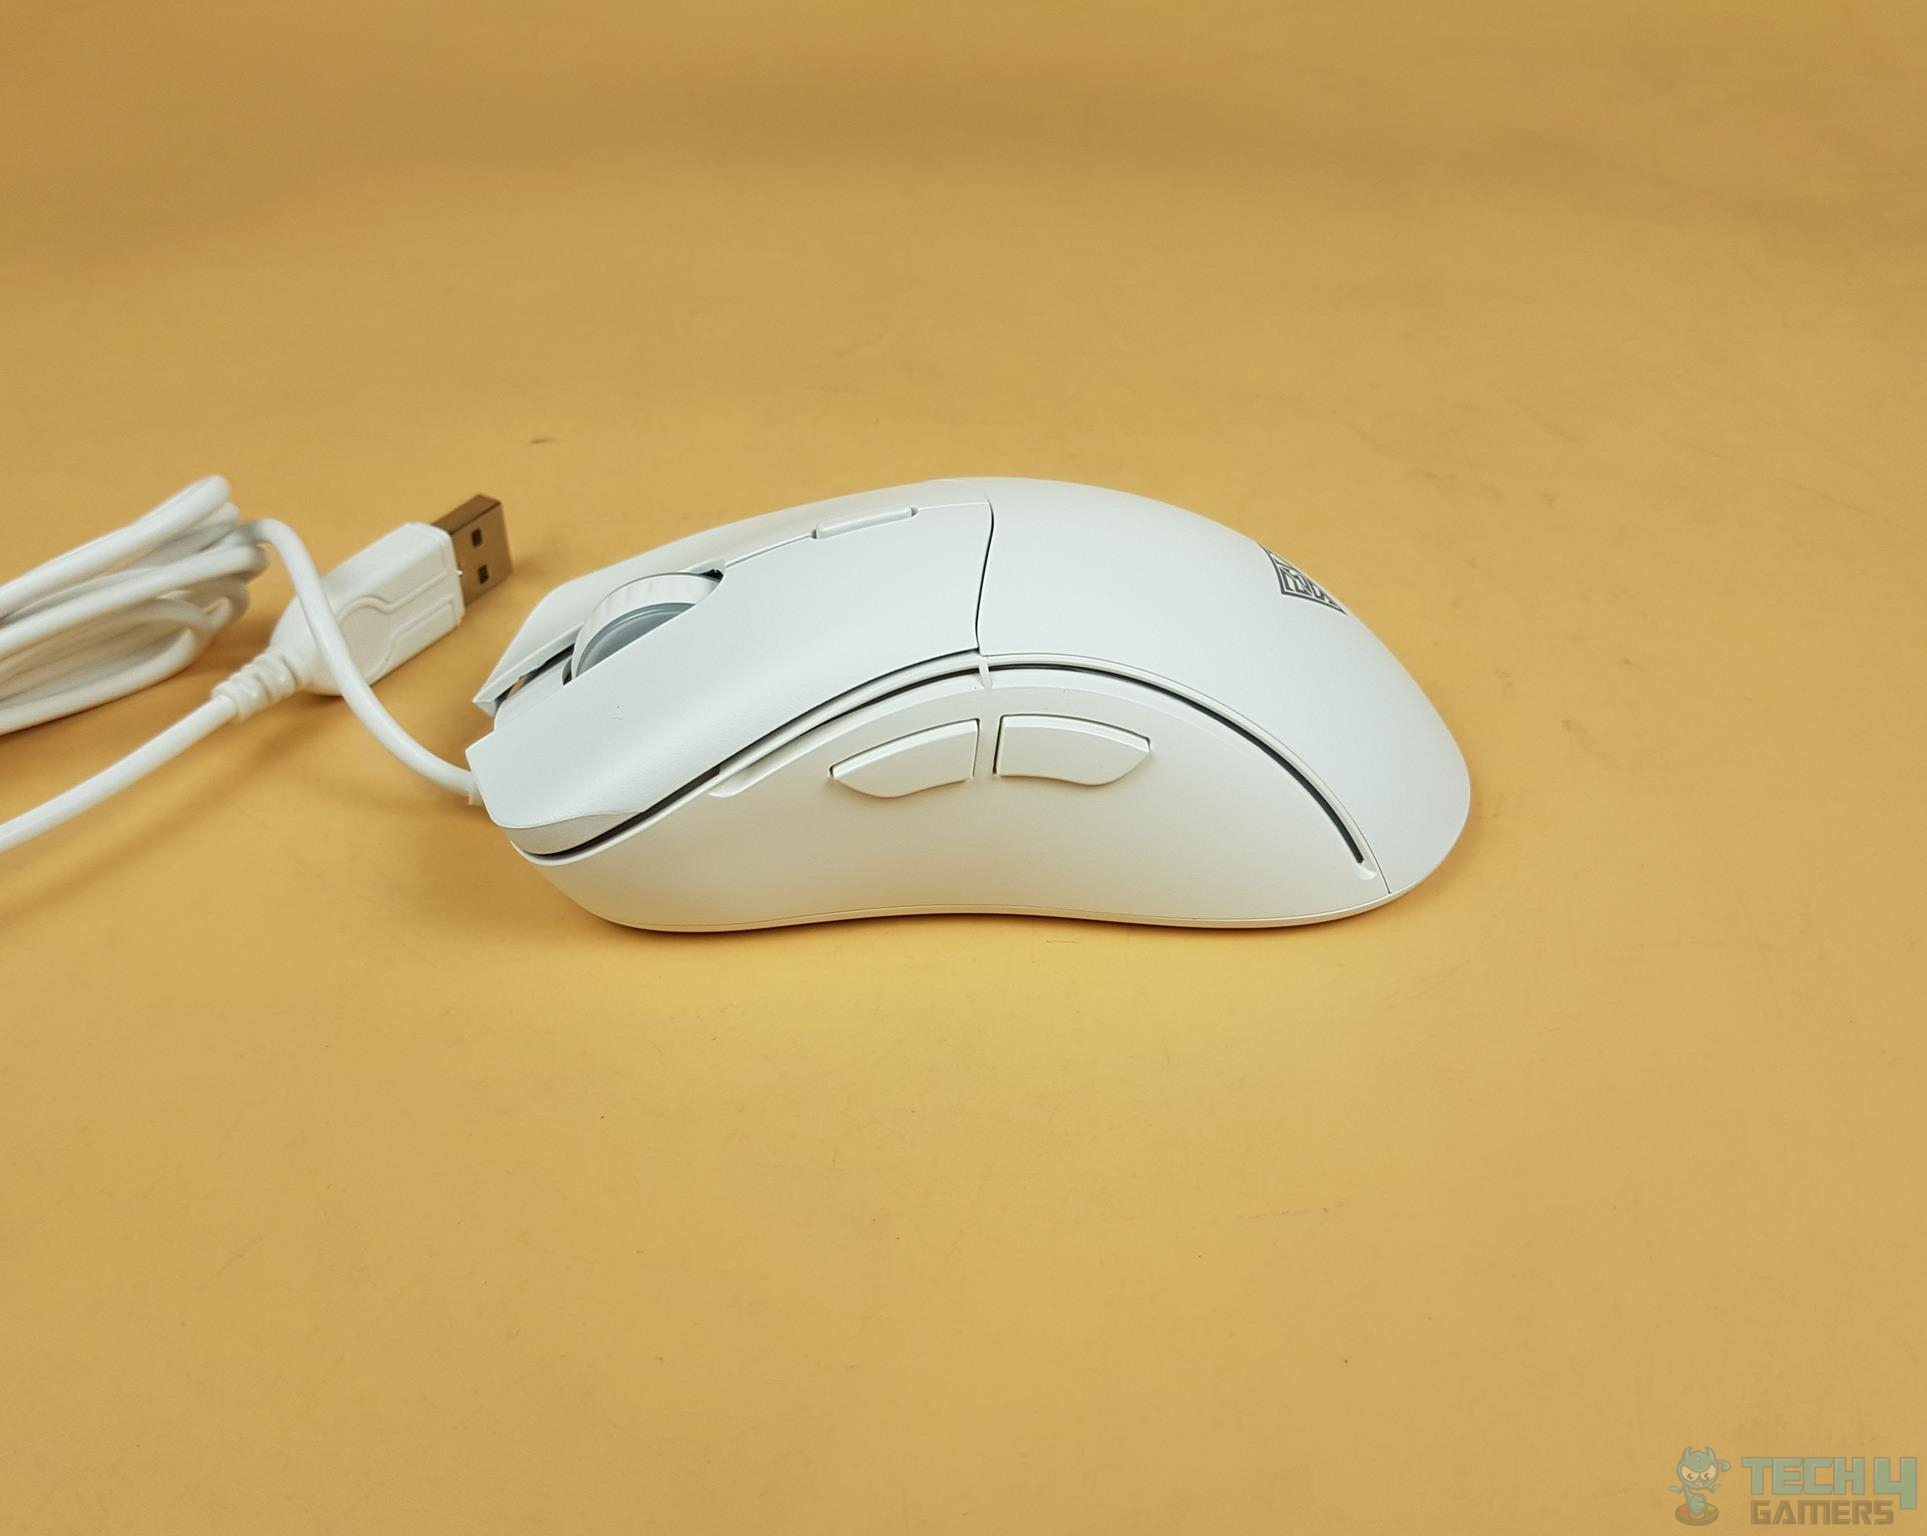 Exhibiting the GAMDIAS Mouse’s side-mounted reprogrammable Macro buttons.